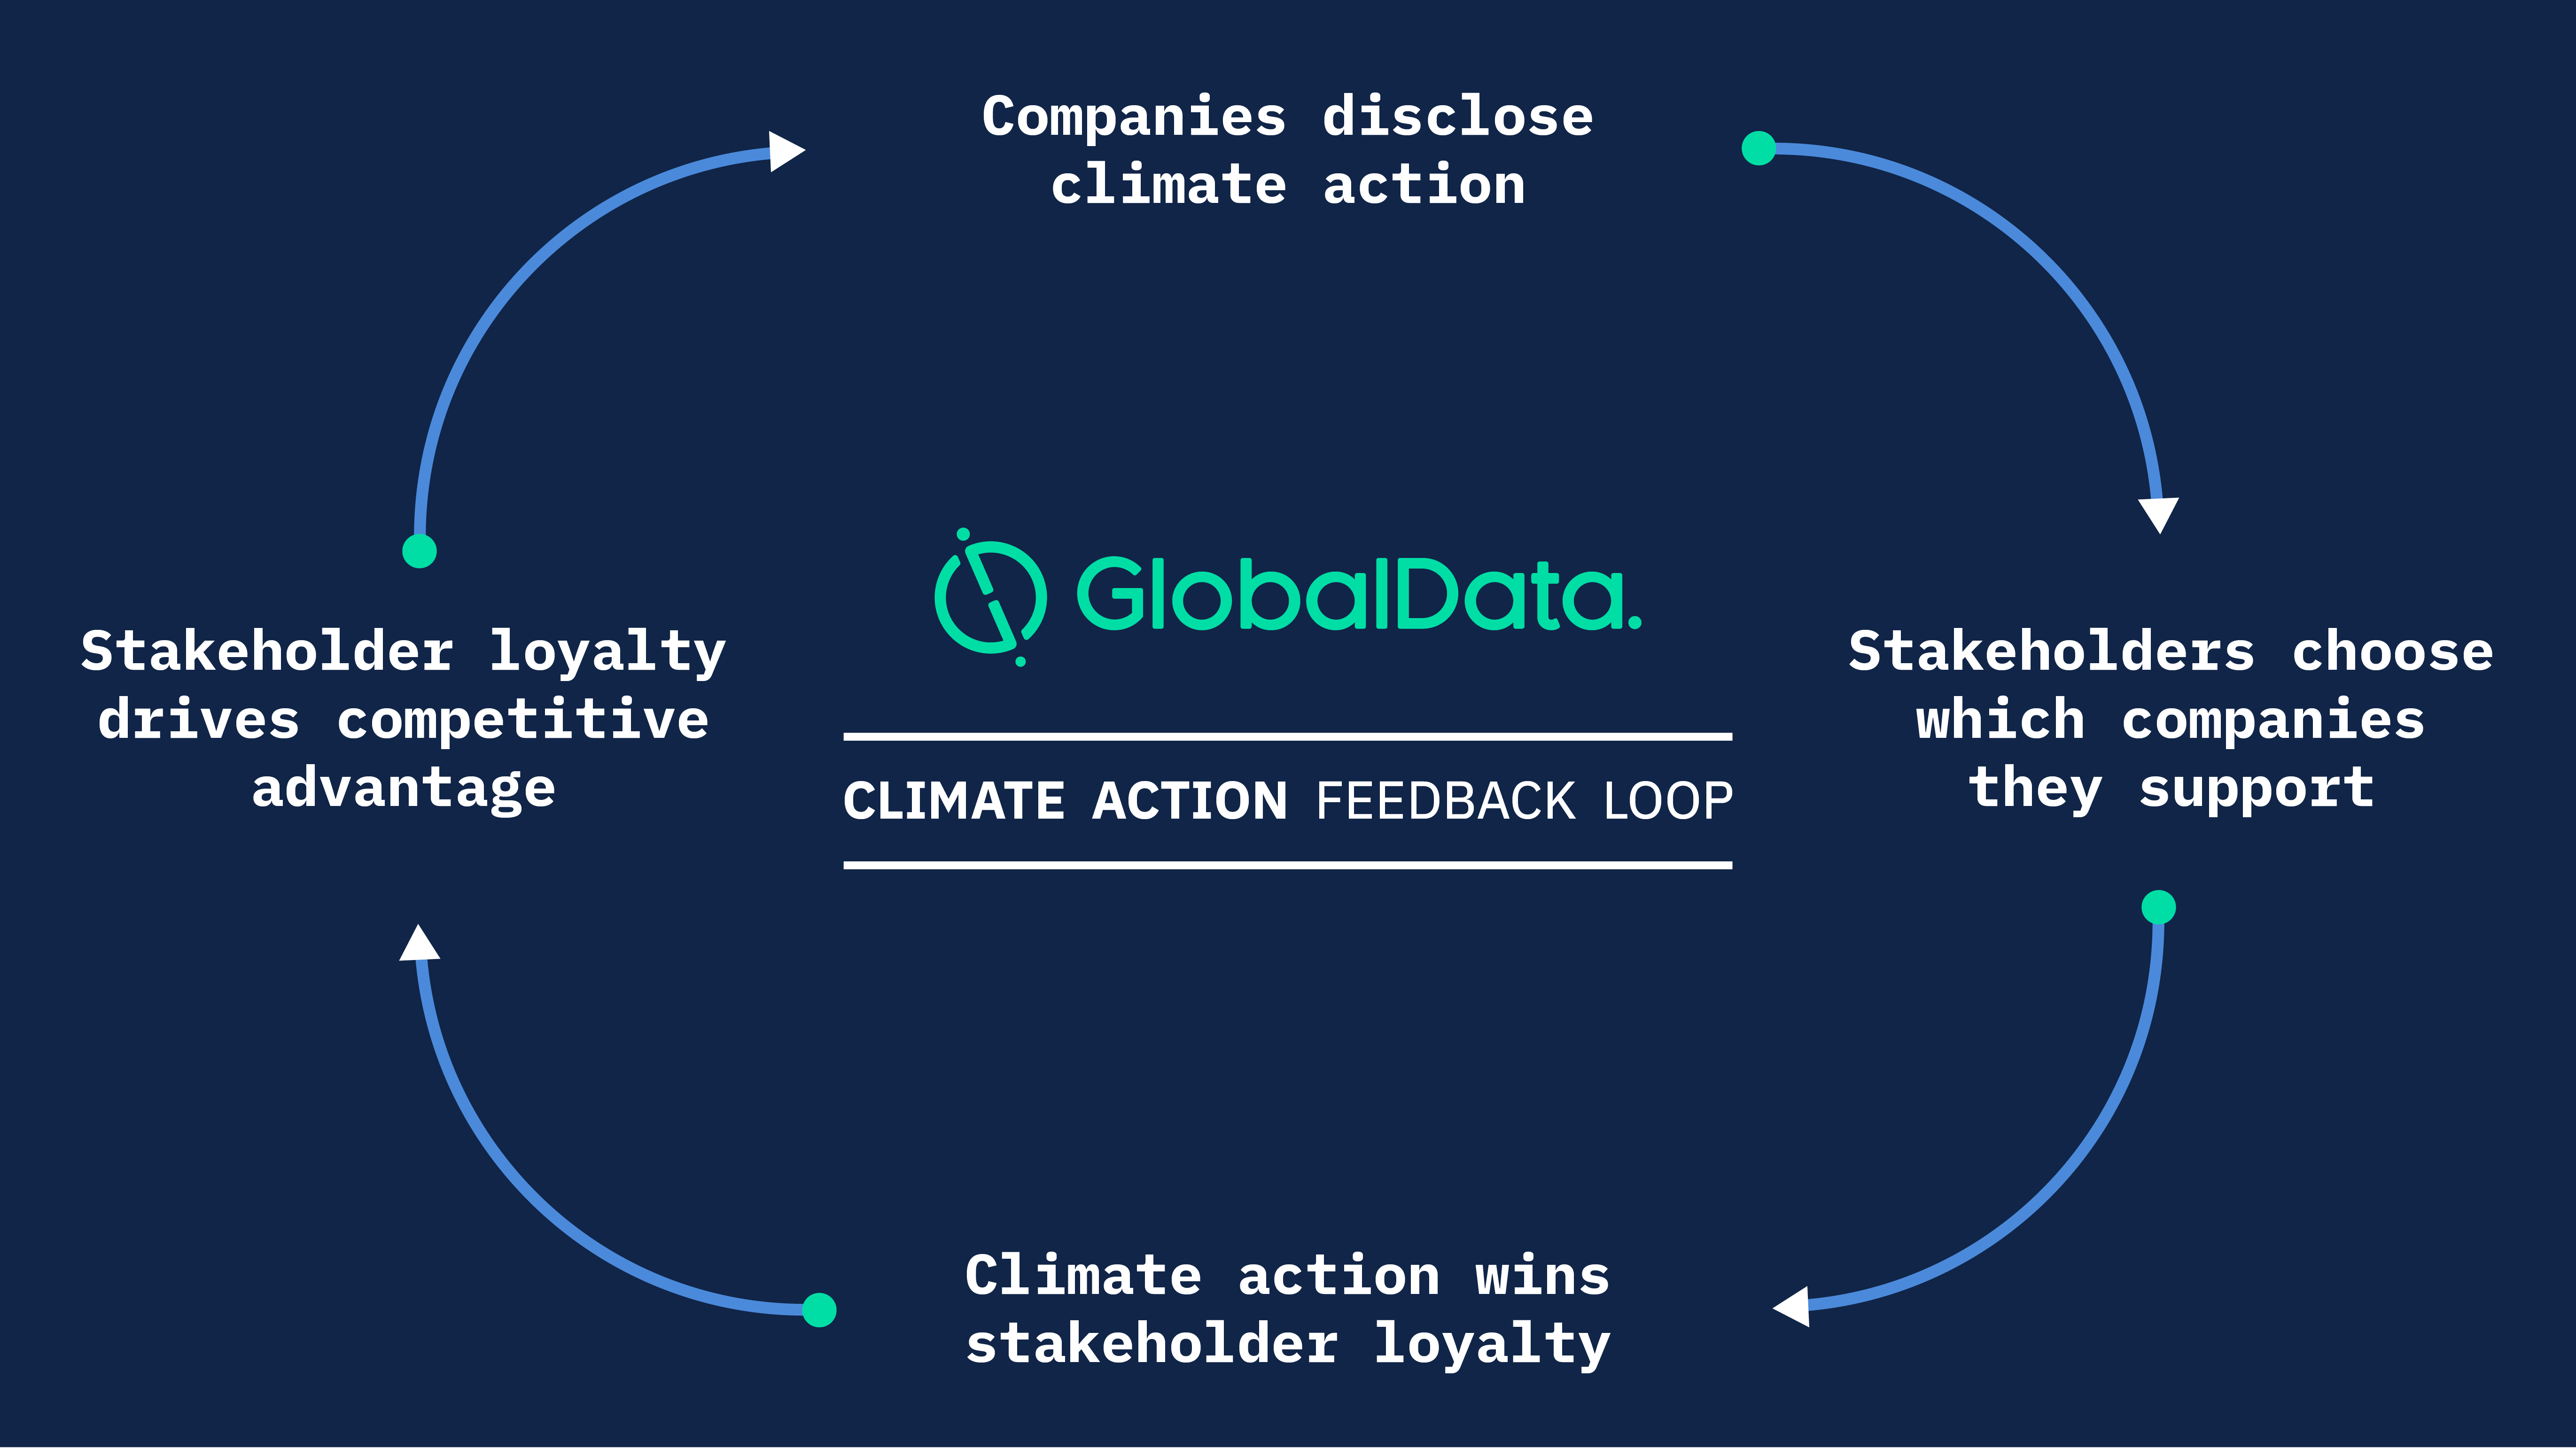 Market mechanisms are driving a climate action feedback loop